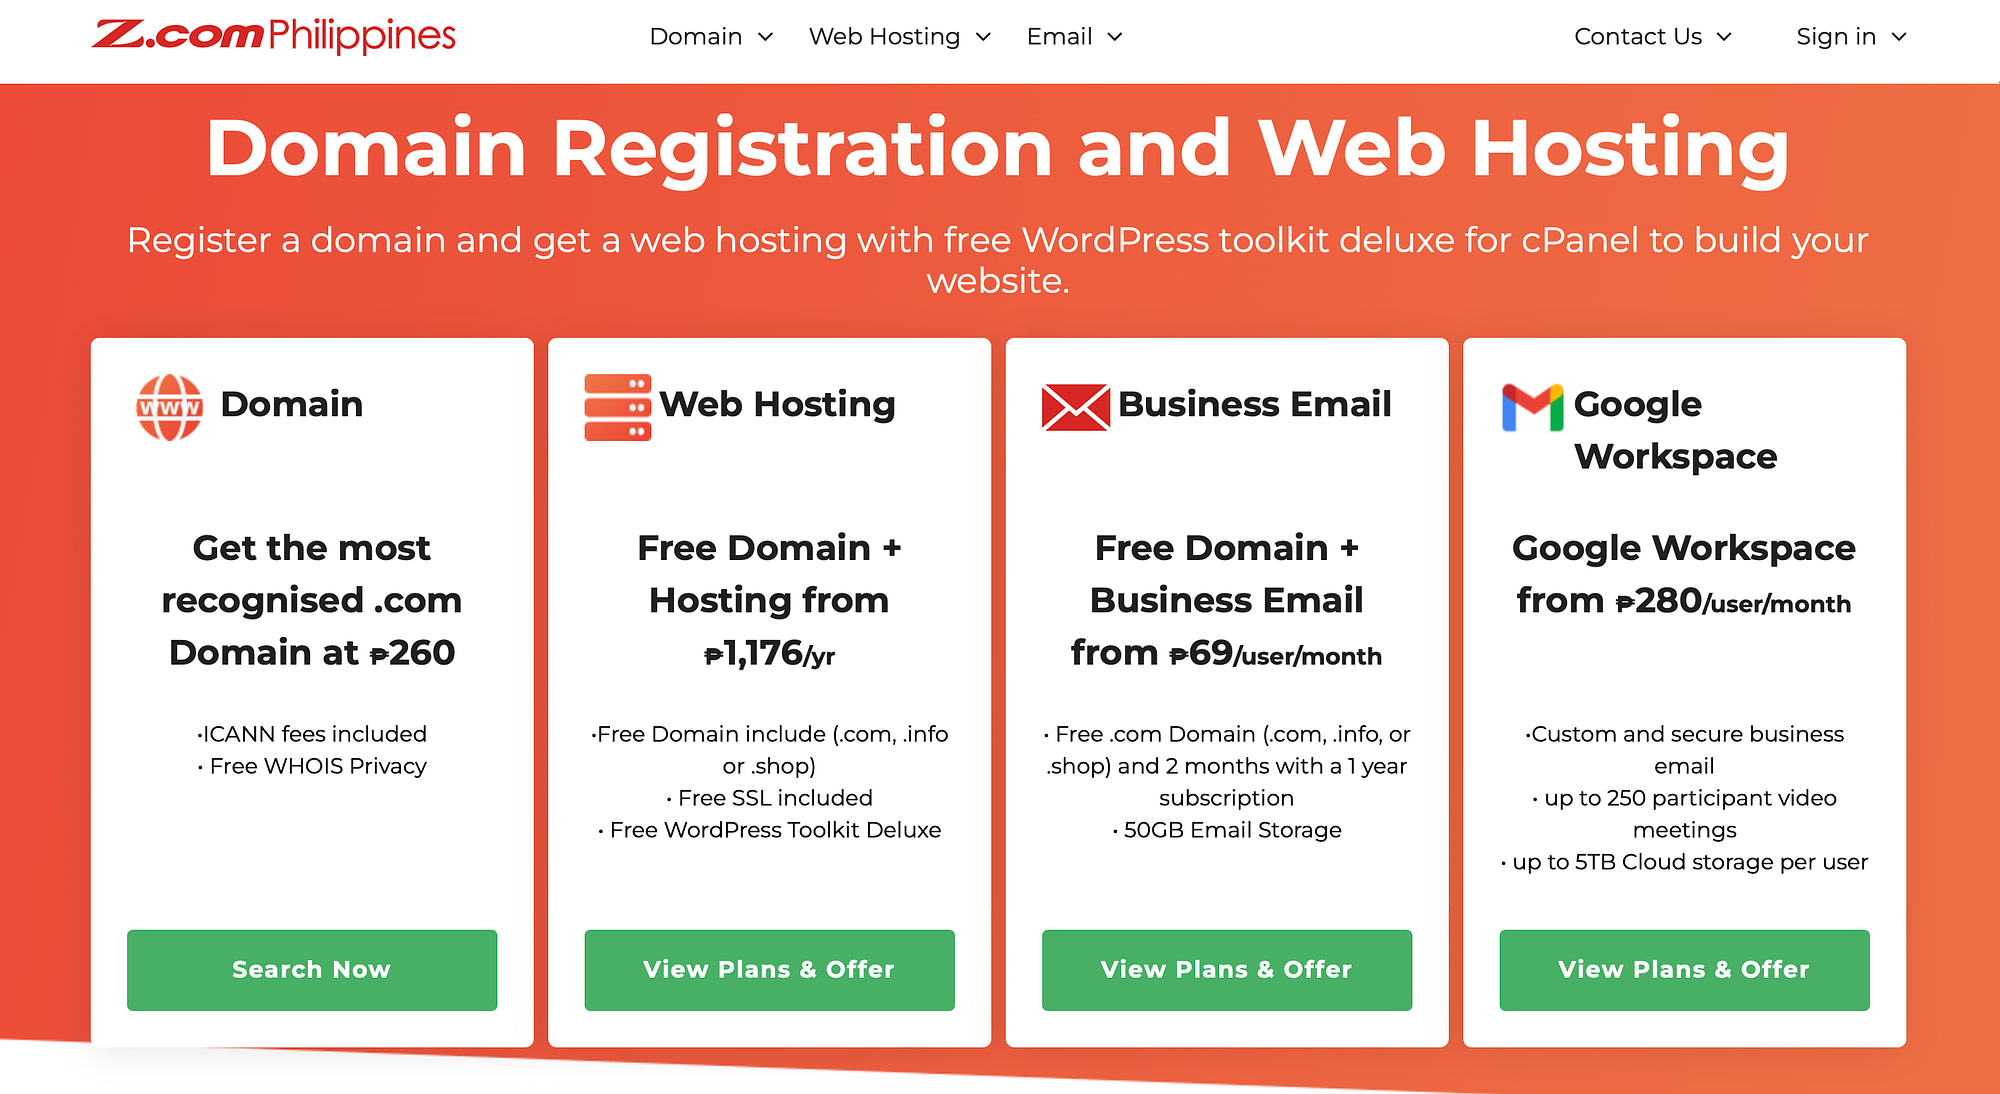 Web.Z.com has some of the best and cheapest web hosting in Philippines.